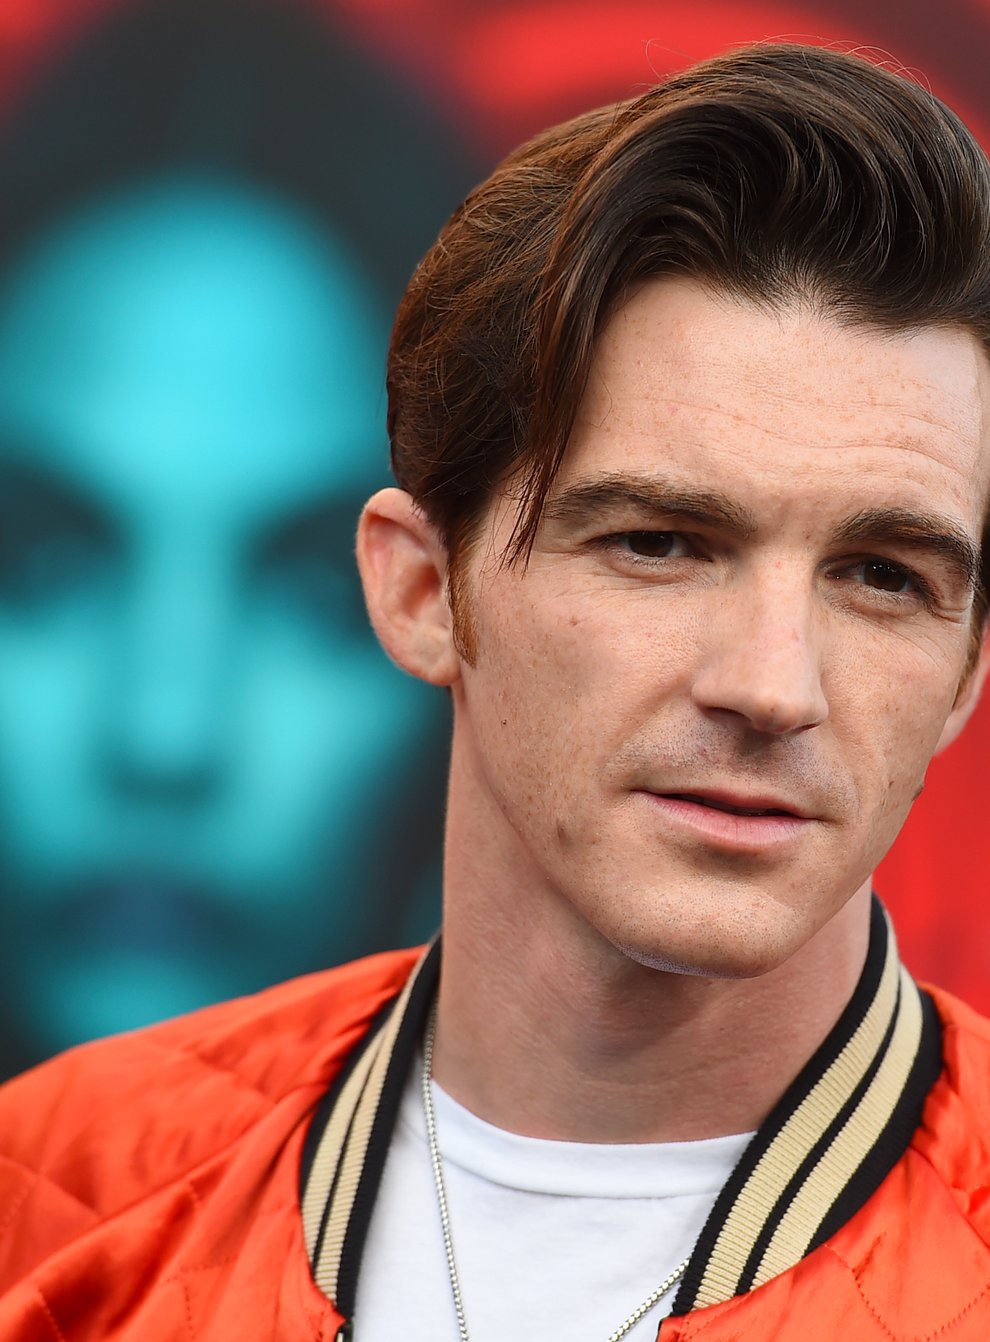 Drake Bell has been sentenced to two years of probation to charges relating to a teenager whom he met online and who attended one of his 2017 concerts in Cleveland when she was 15